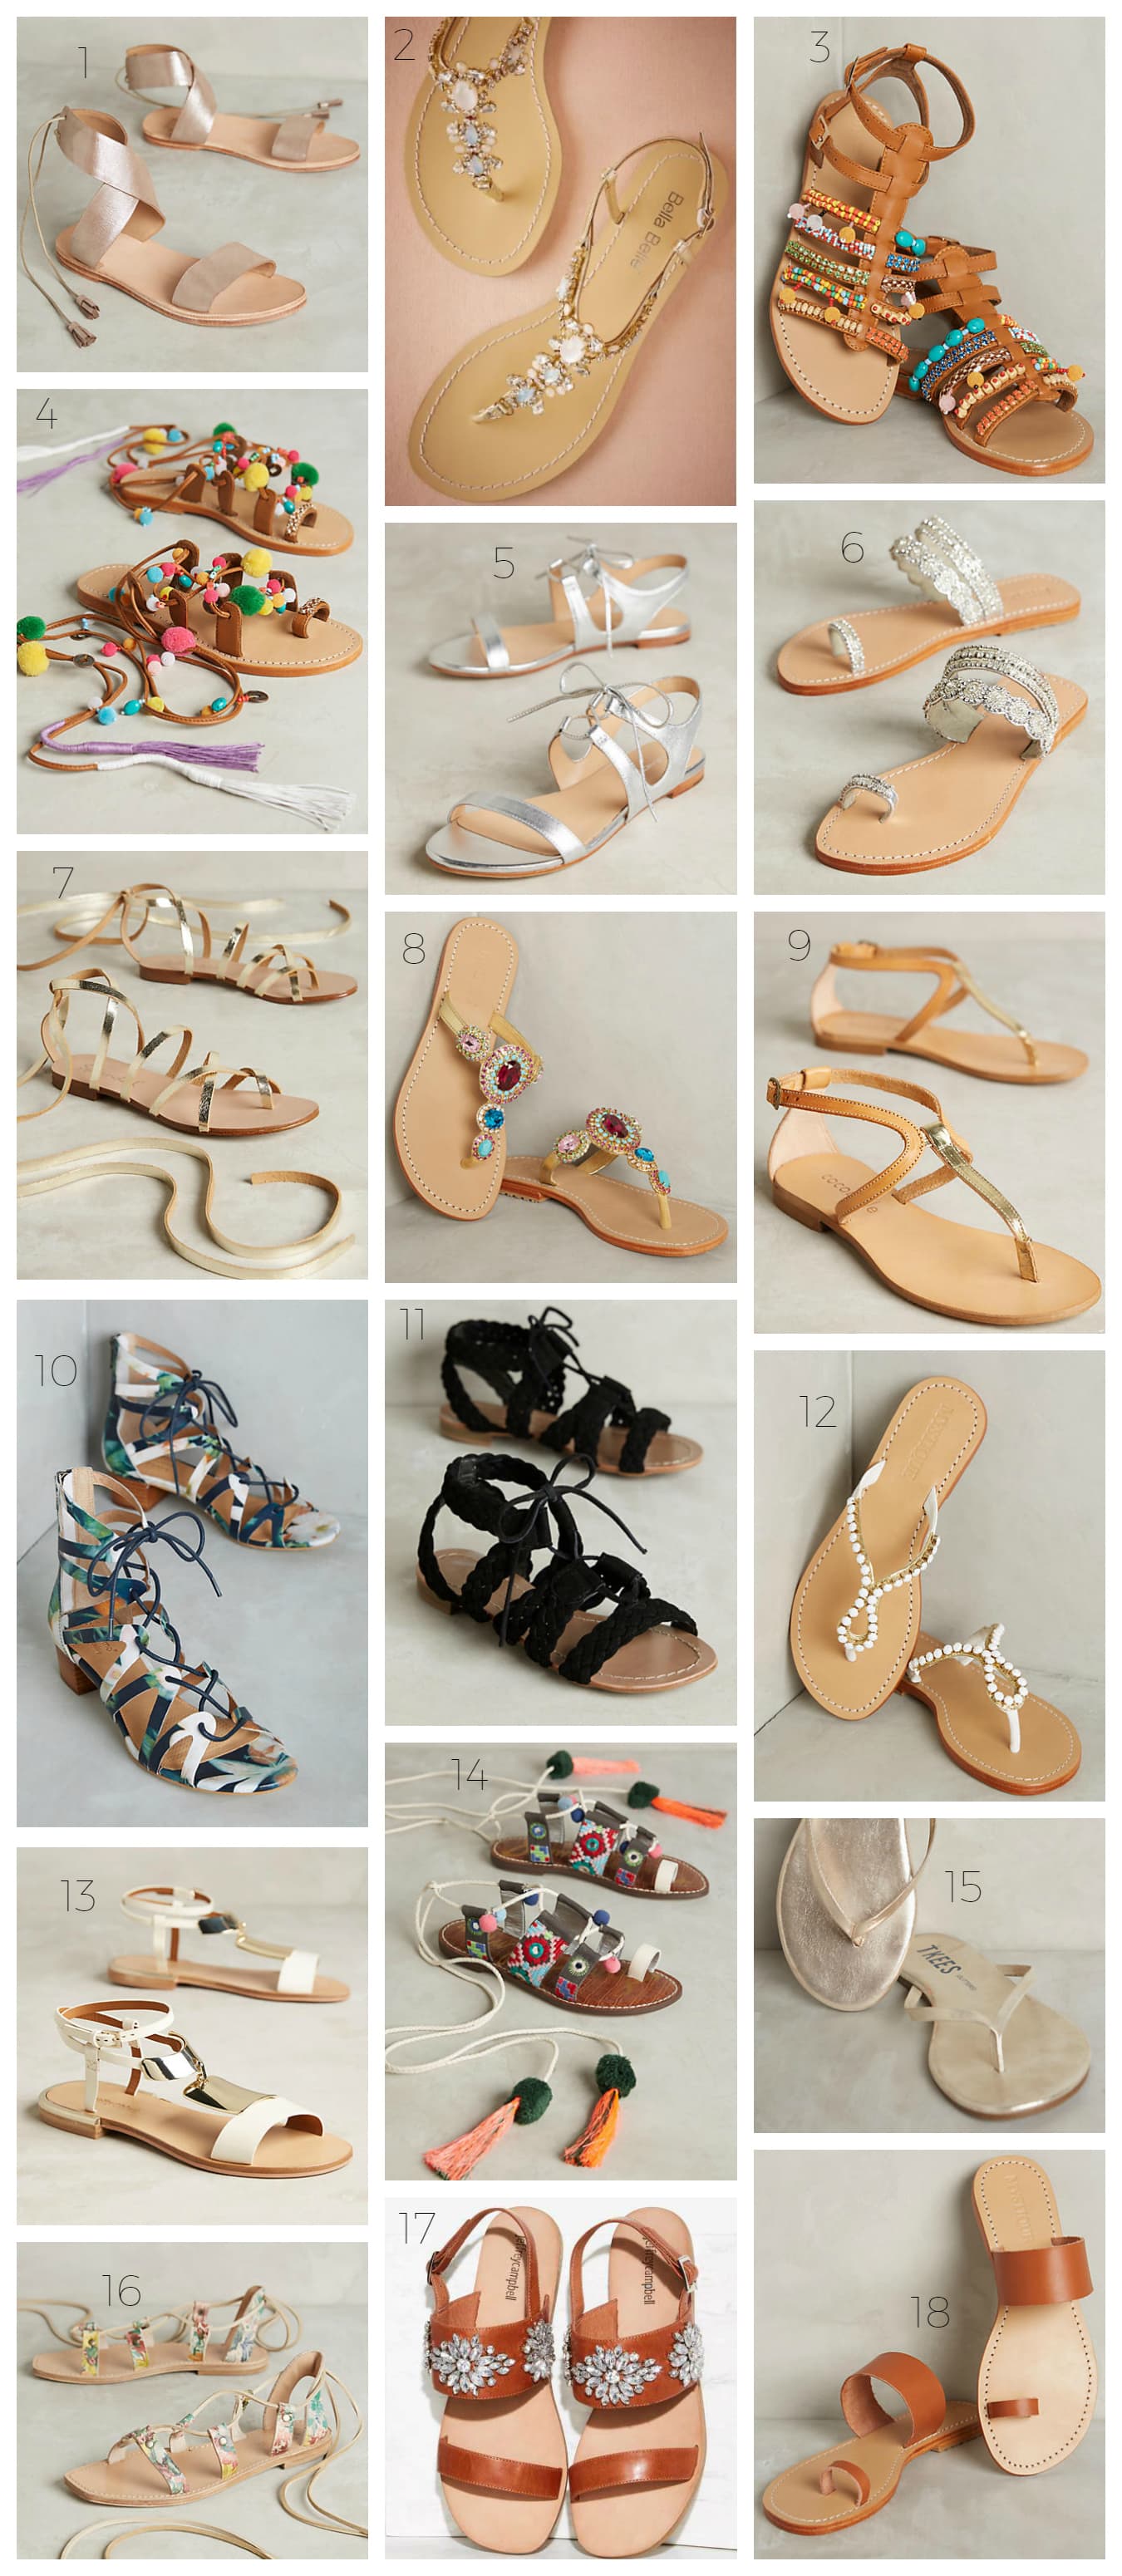 Looking for a cute pair of summer sandals? Style blogger Ashley Brooke Nicholas has rounded up the cutest summer sandals, and there's a pair that fits every single budget! If you're a fan of embellished sandals, lace-up sandals, chic and simple sandals, and studded sandals, you're gonna love this post!